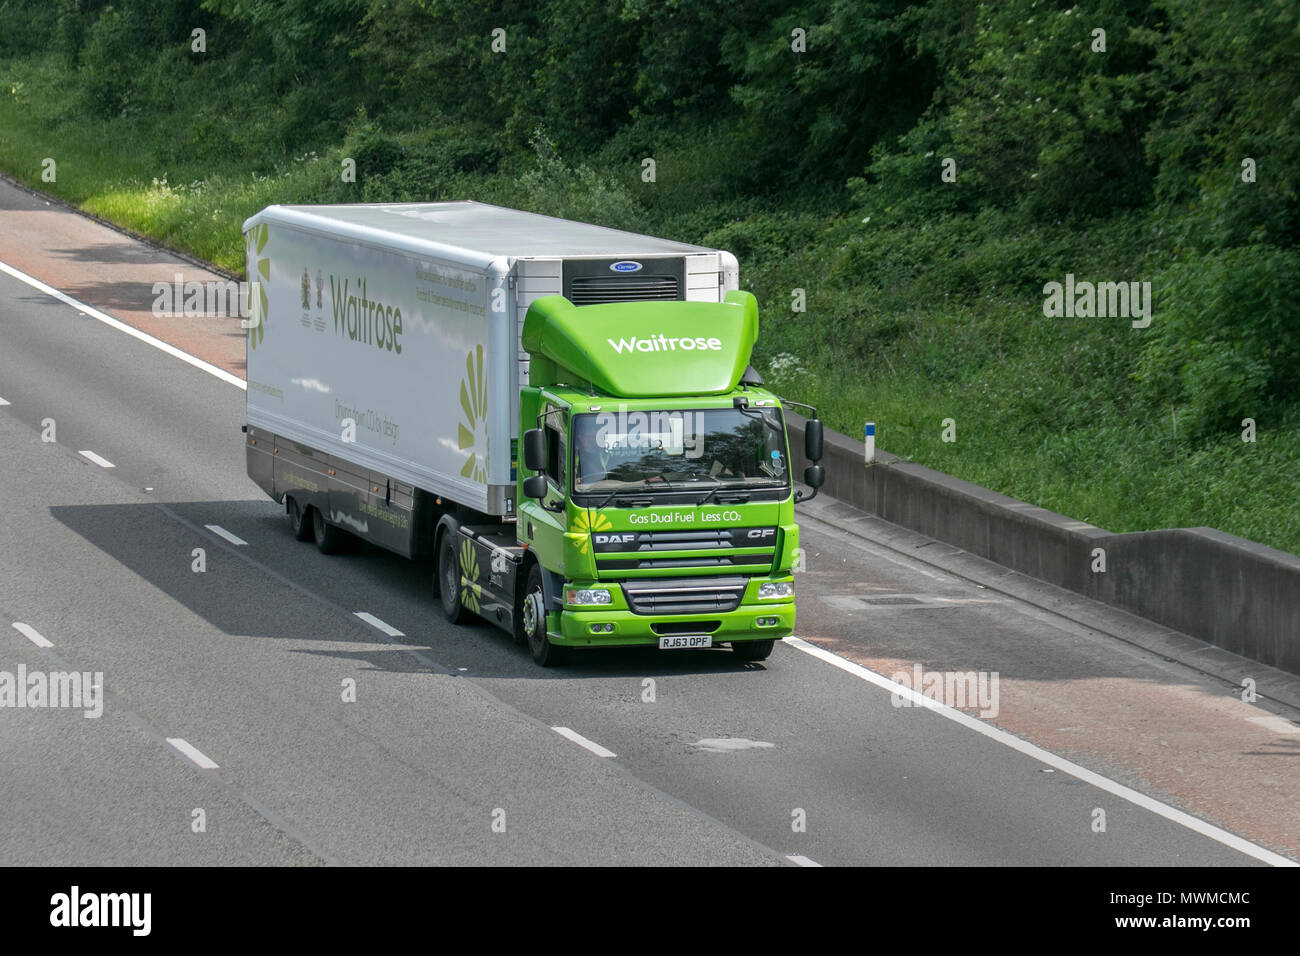 Waitrose 9186cc diesel food truck, running on 100% renewable Bio fuel, supply chain supermarket delivery trucks; Heavy goods, Scania P340 commercial traffic on the M6 southbound, UK Stock Photo